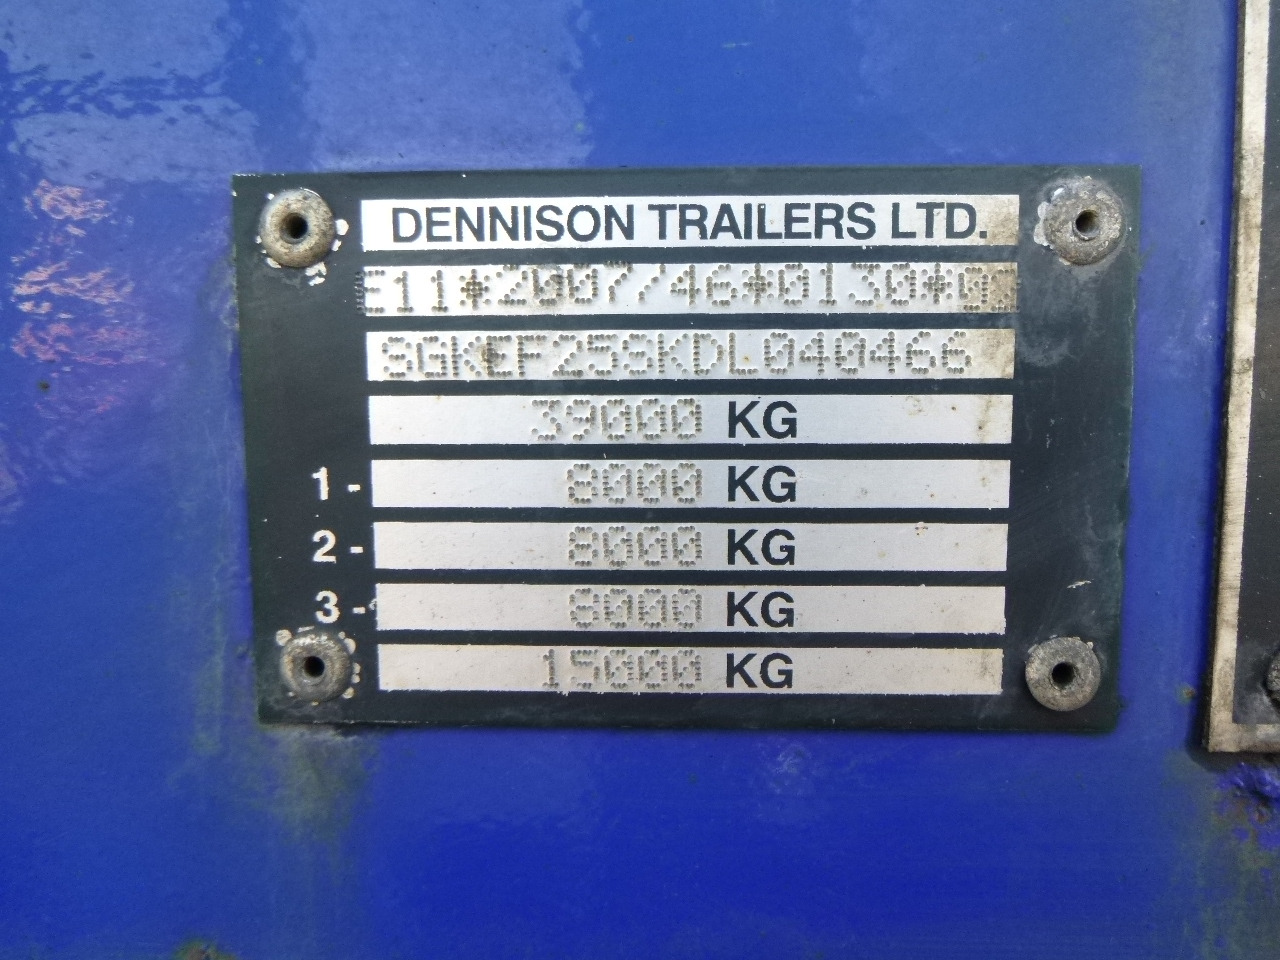 Dennison Stack - 3 x container trailer 20-30-40-45 ft إيجار Dennison Stack - 3 x container trailer 20-30-40-45 ft: صور 21